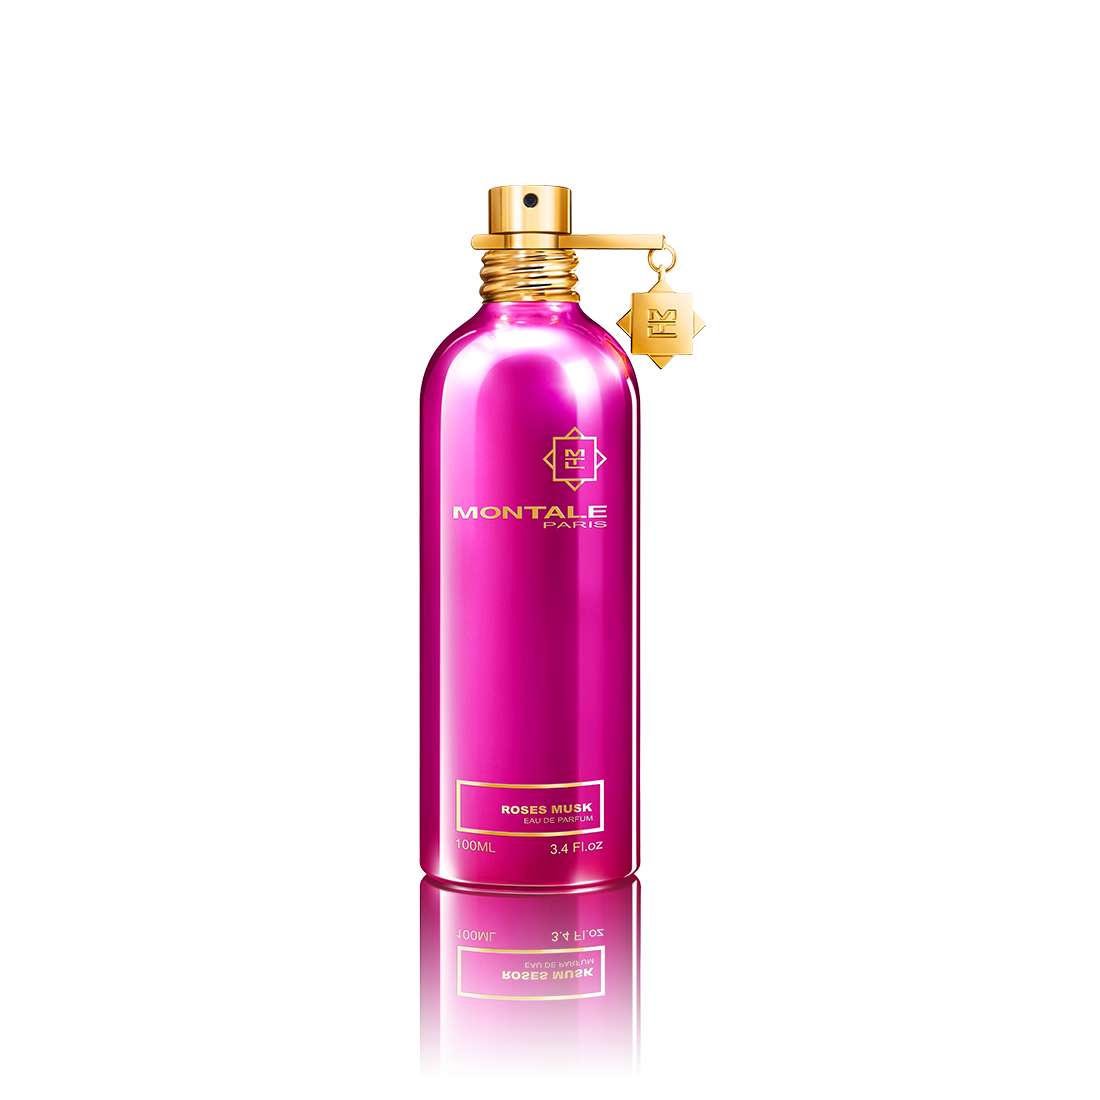 MONTALE - ROSES MUSK